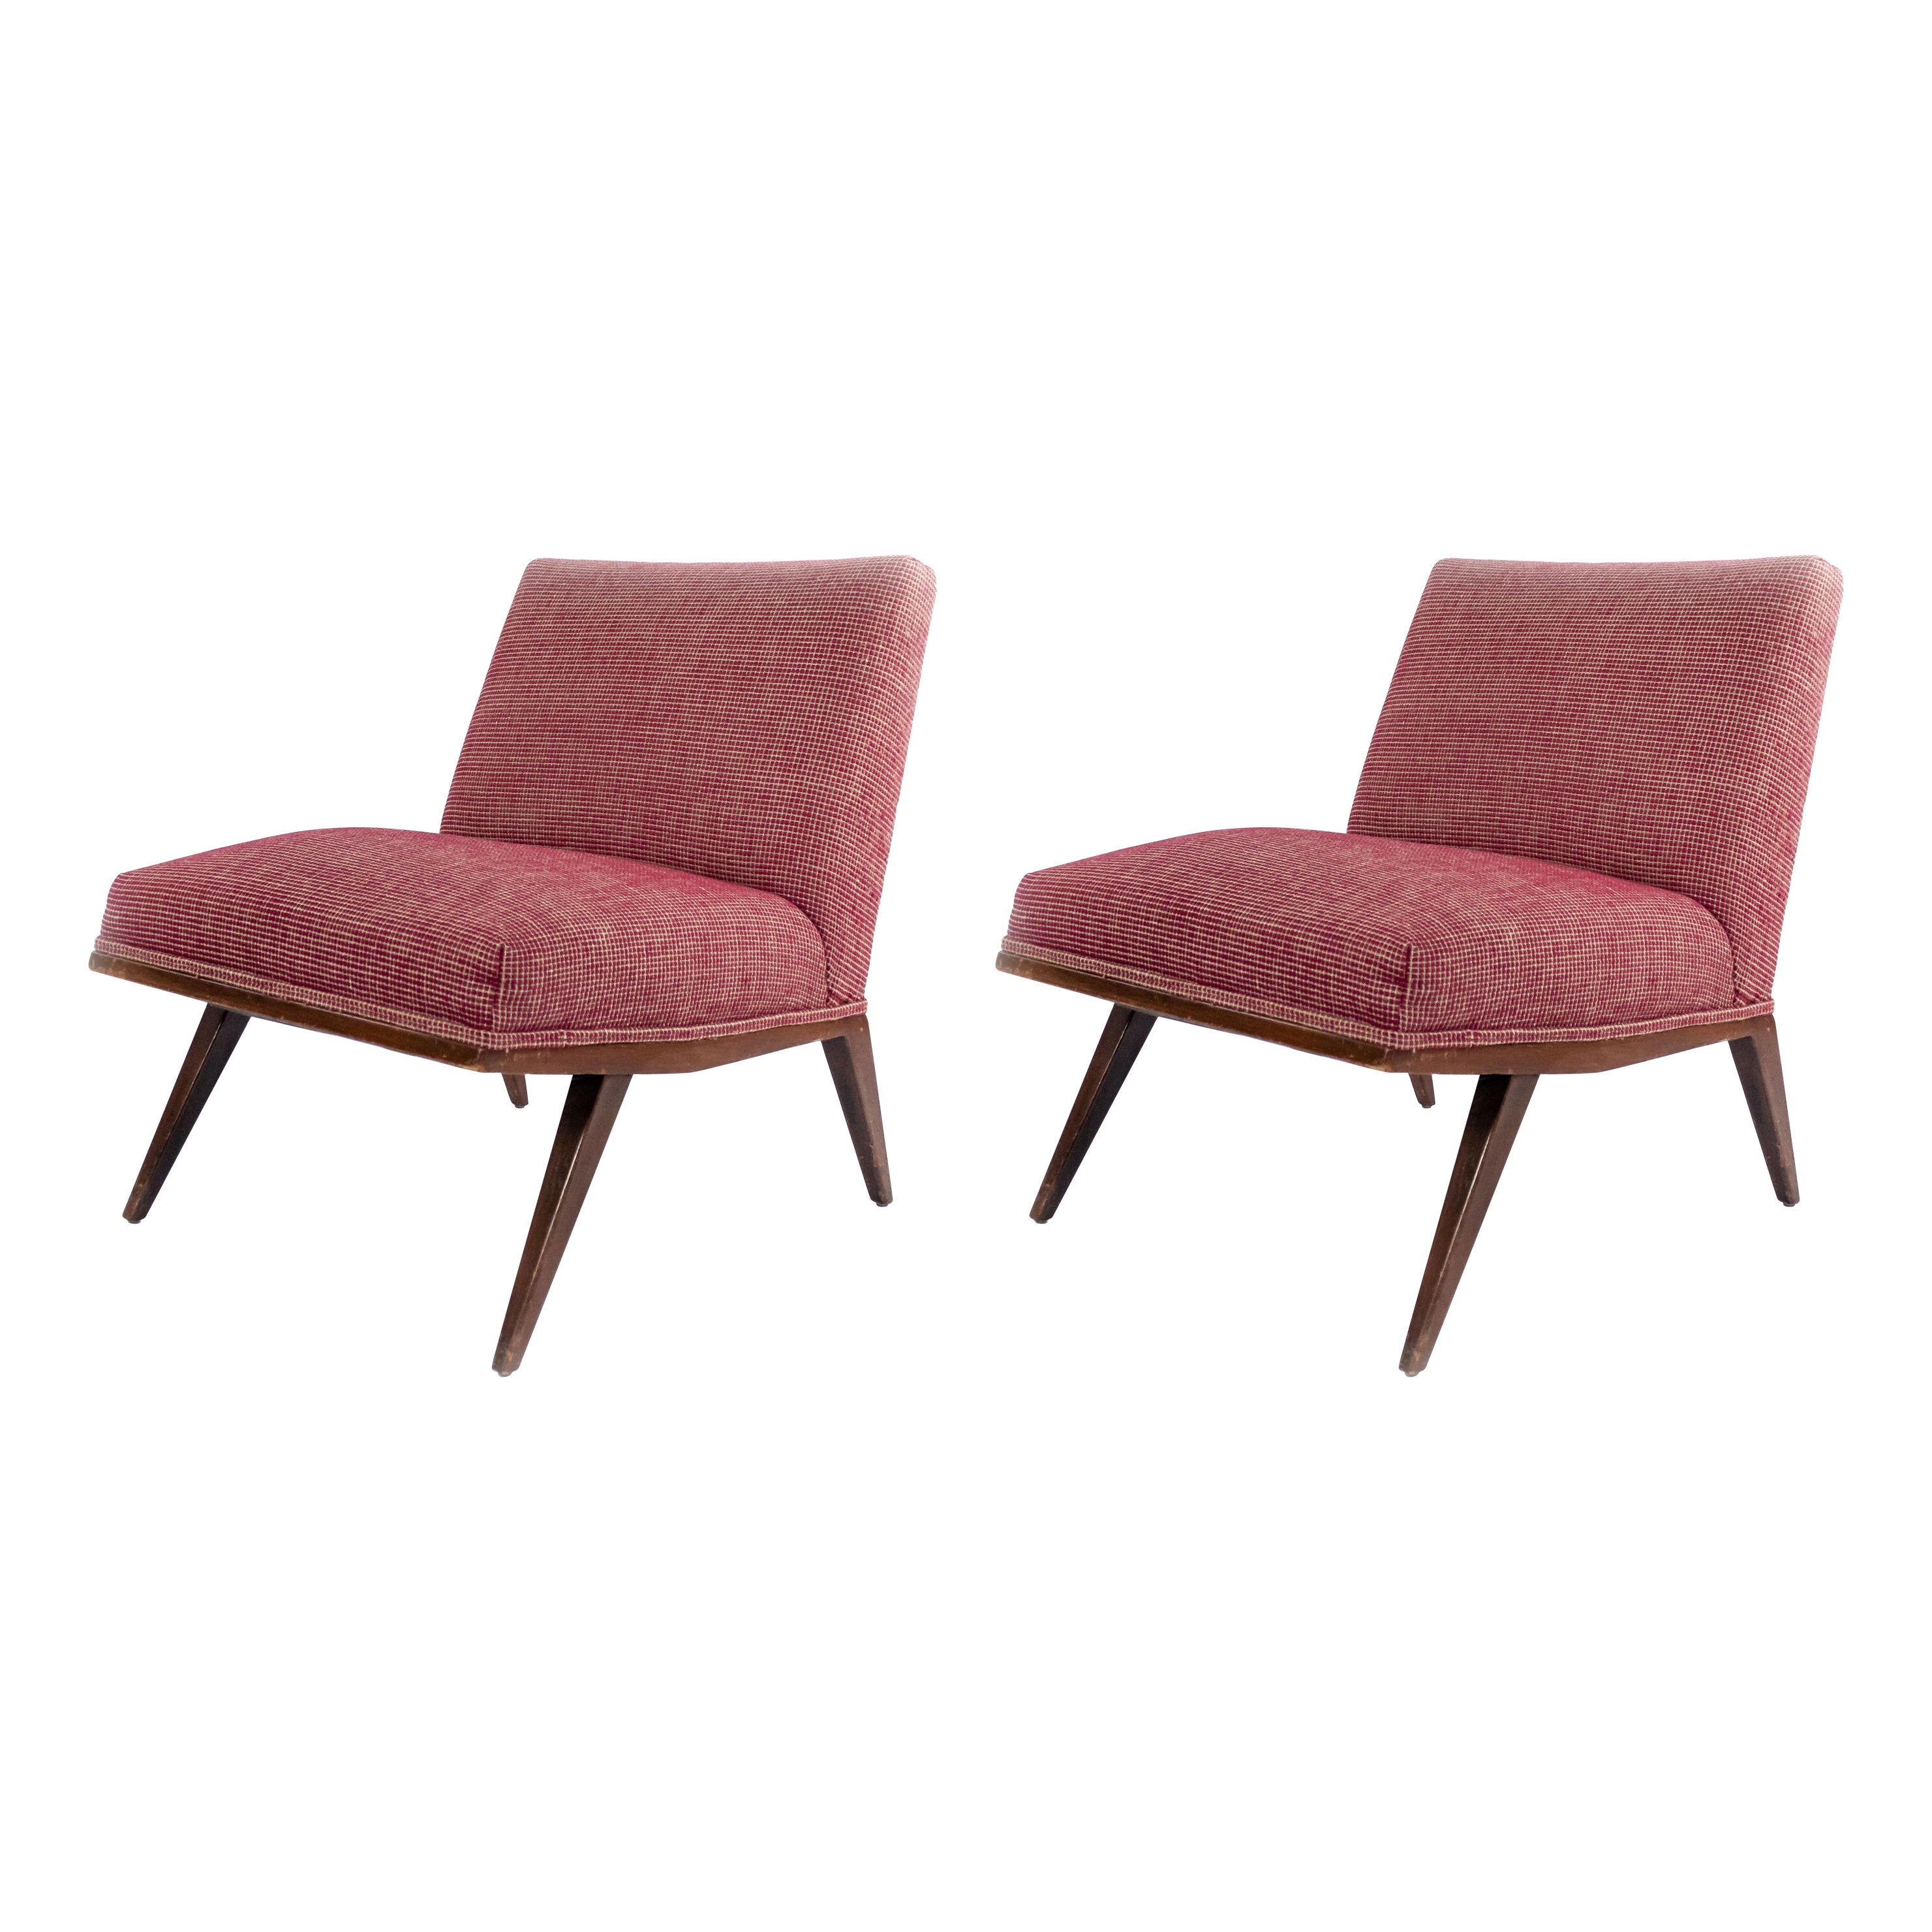 Pair of Mid-Century Red Upholstered Slipper Chairs